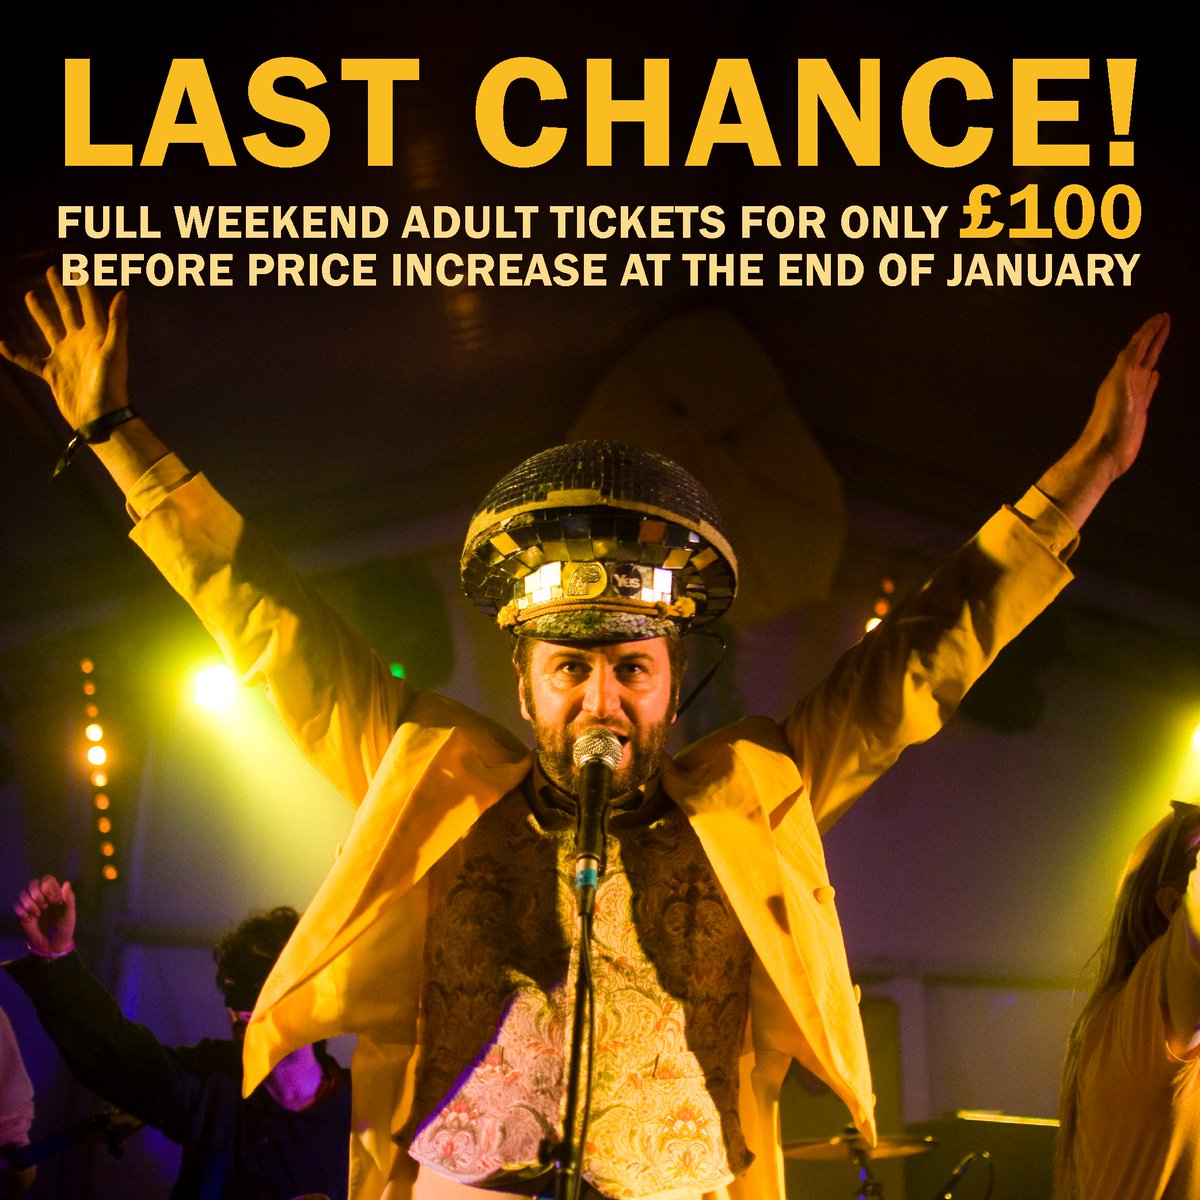 MugStock 2024 ticket prices are going up at the end of January. This is your last chance to get full weekend adult tickets for only £100 (72 hours of merriment for that price works out about £1.39 per hour spent at MugStock 😉) Book your tickets now 🎟️ mugstock.org/tickets